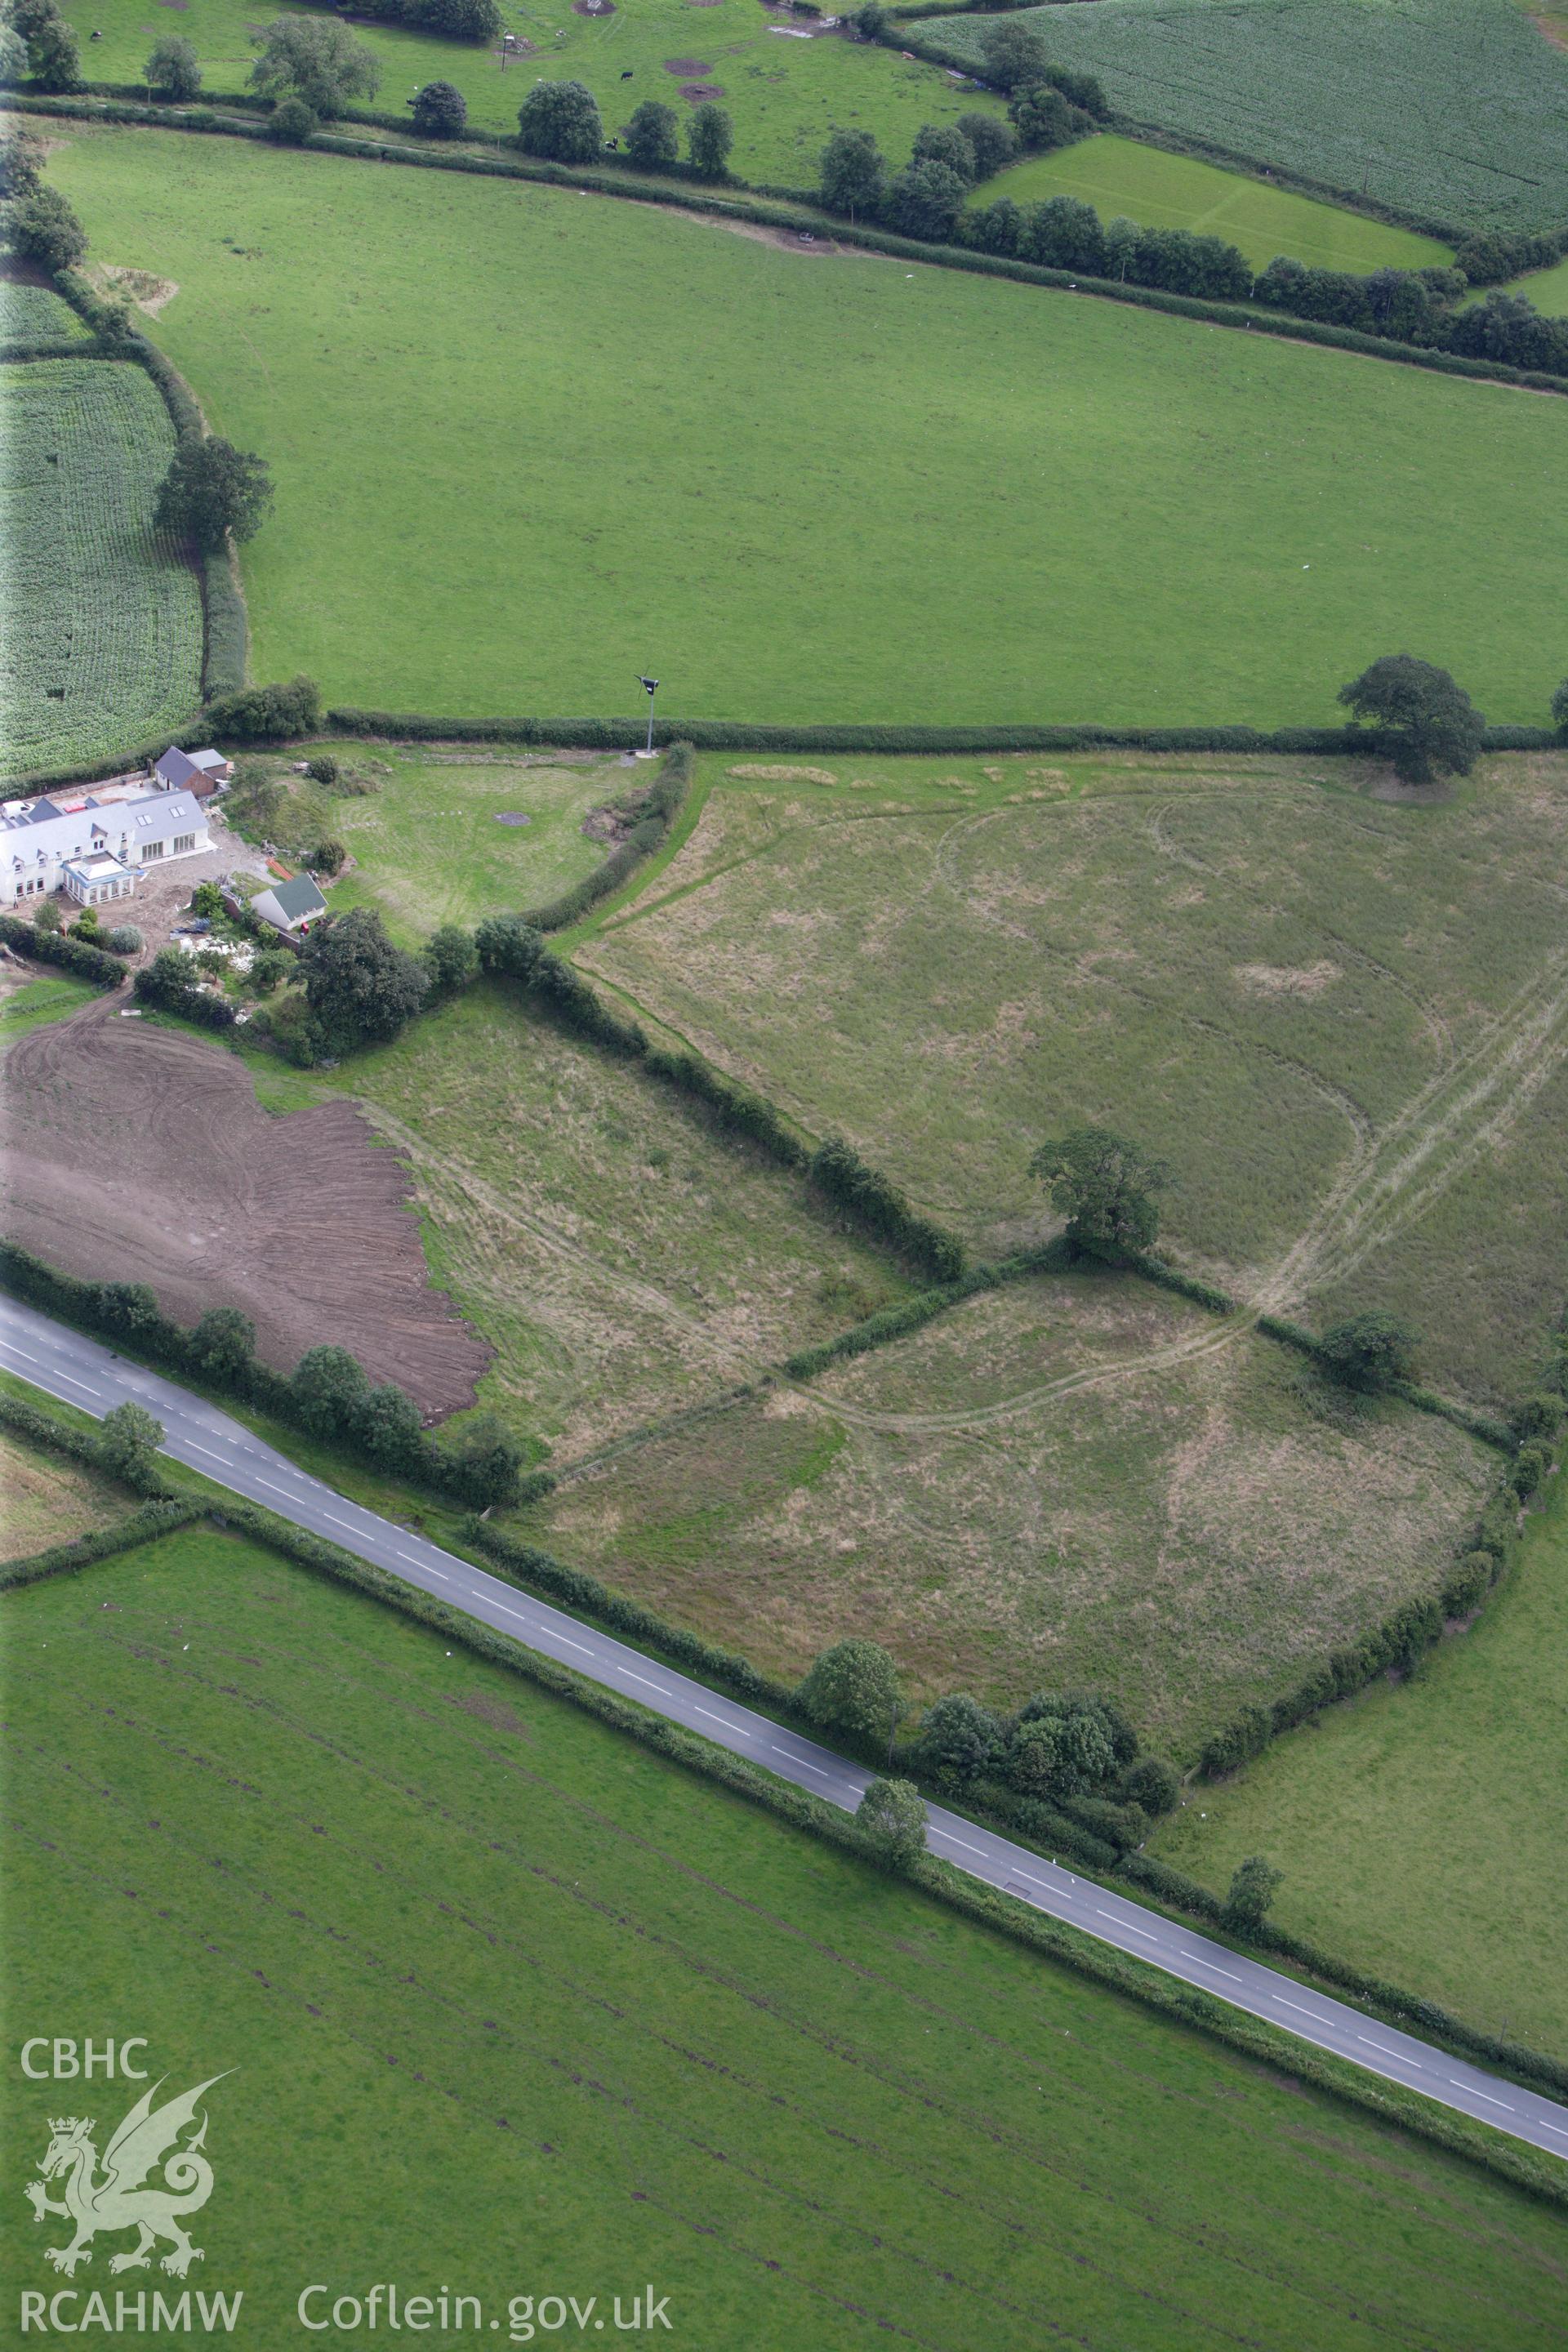 RCAHMW colour oblique aerial photograph of a section of Offa's Dyke, or Whitford Dyke, northwest and southeast of Brynbella Mound. Taken on 30 July 2009 by Toby Driver